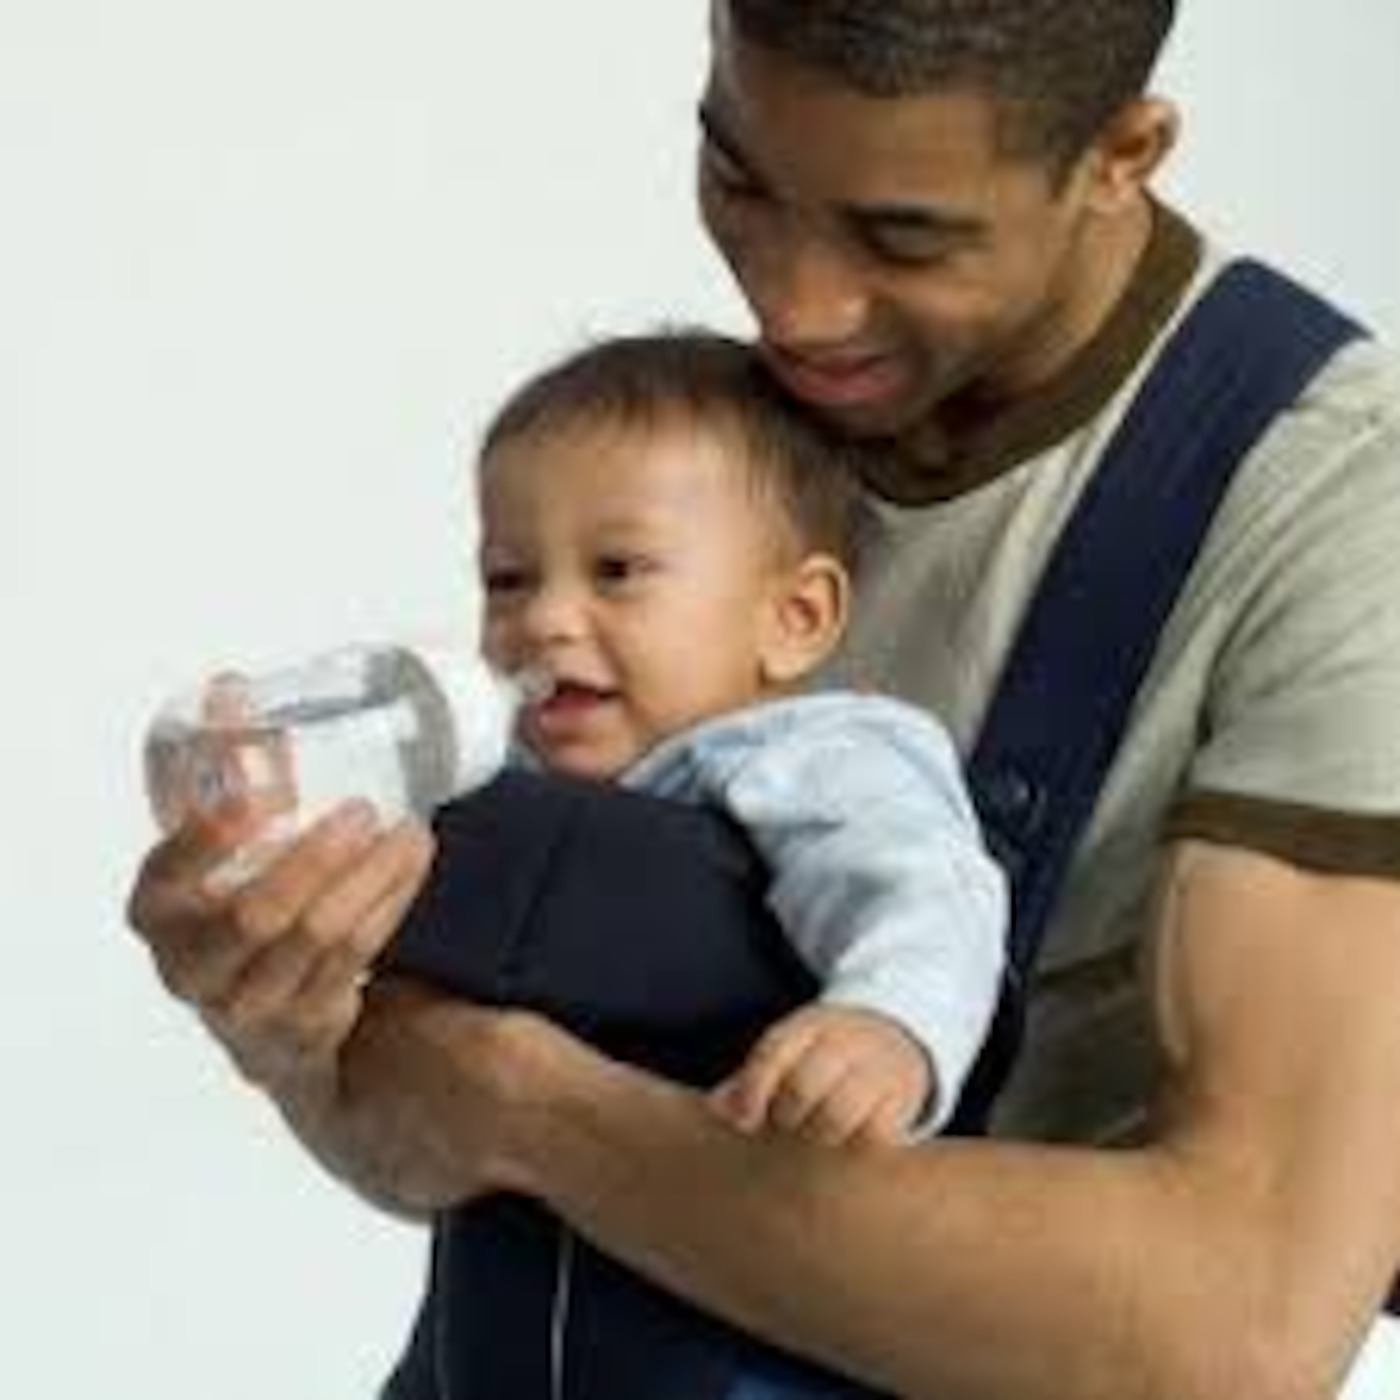 Young Fatherhood? Does it ruin your life or is it the making of you as a man